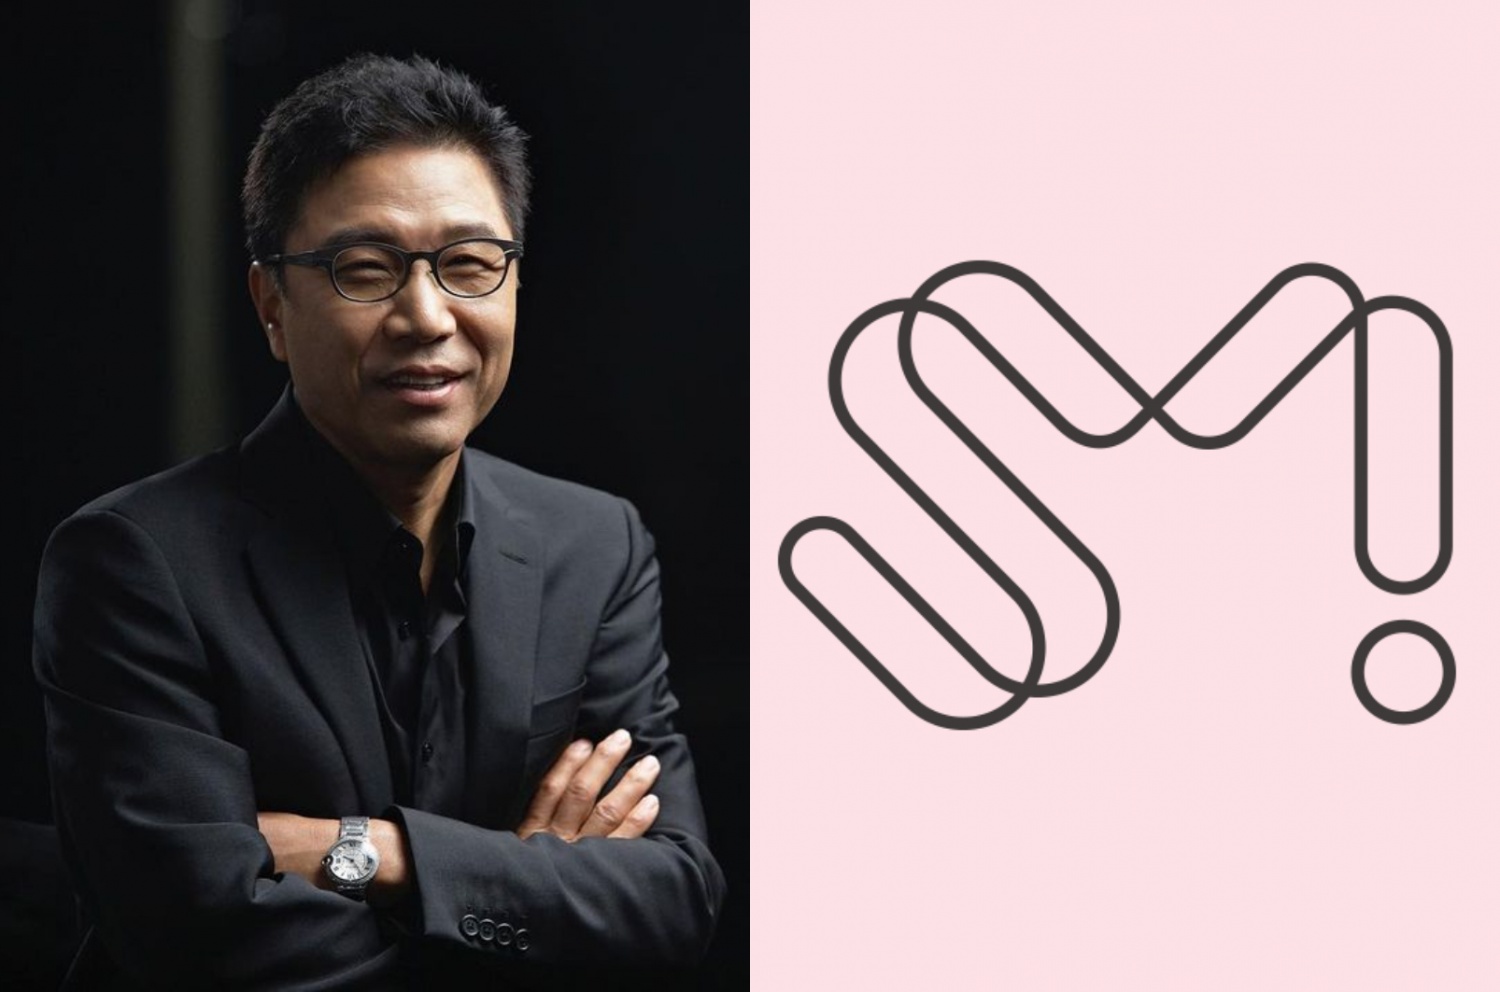 Lee Soo Man has reportedly sued SM Entertainment for unlawful practices